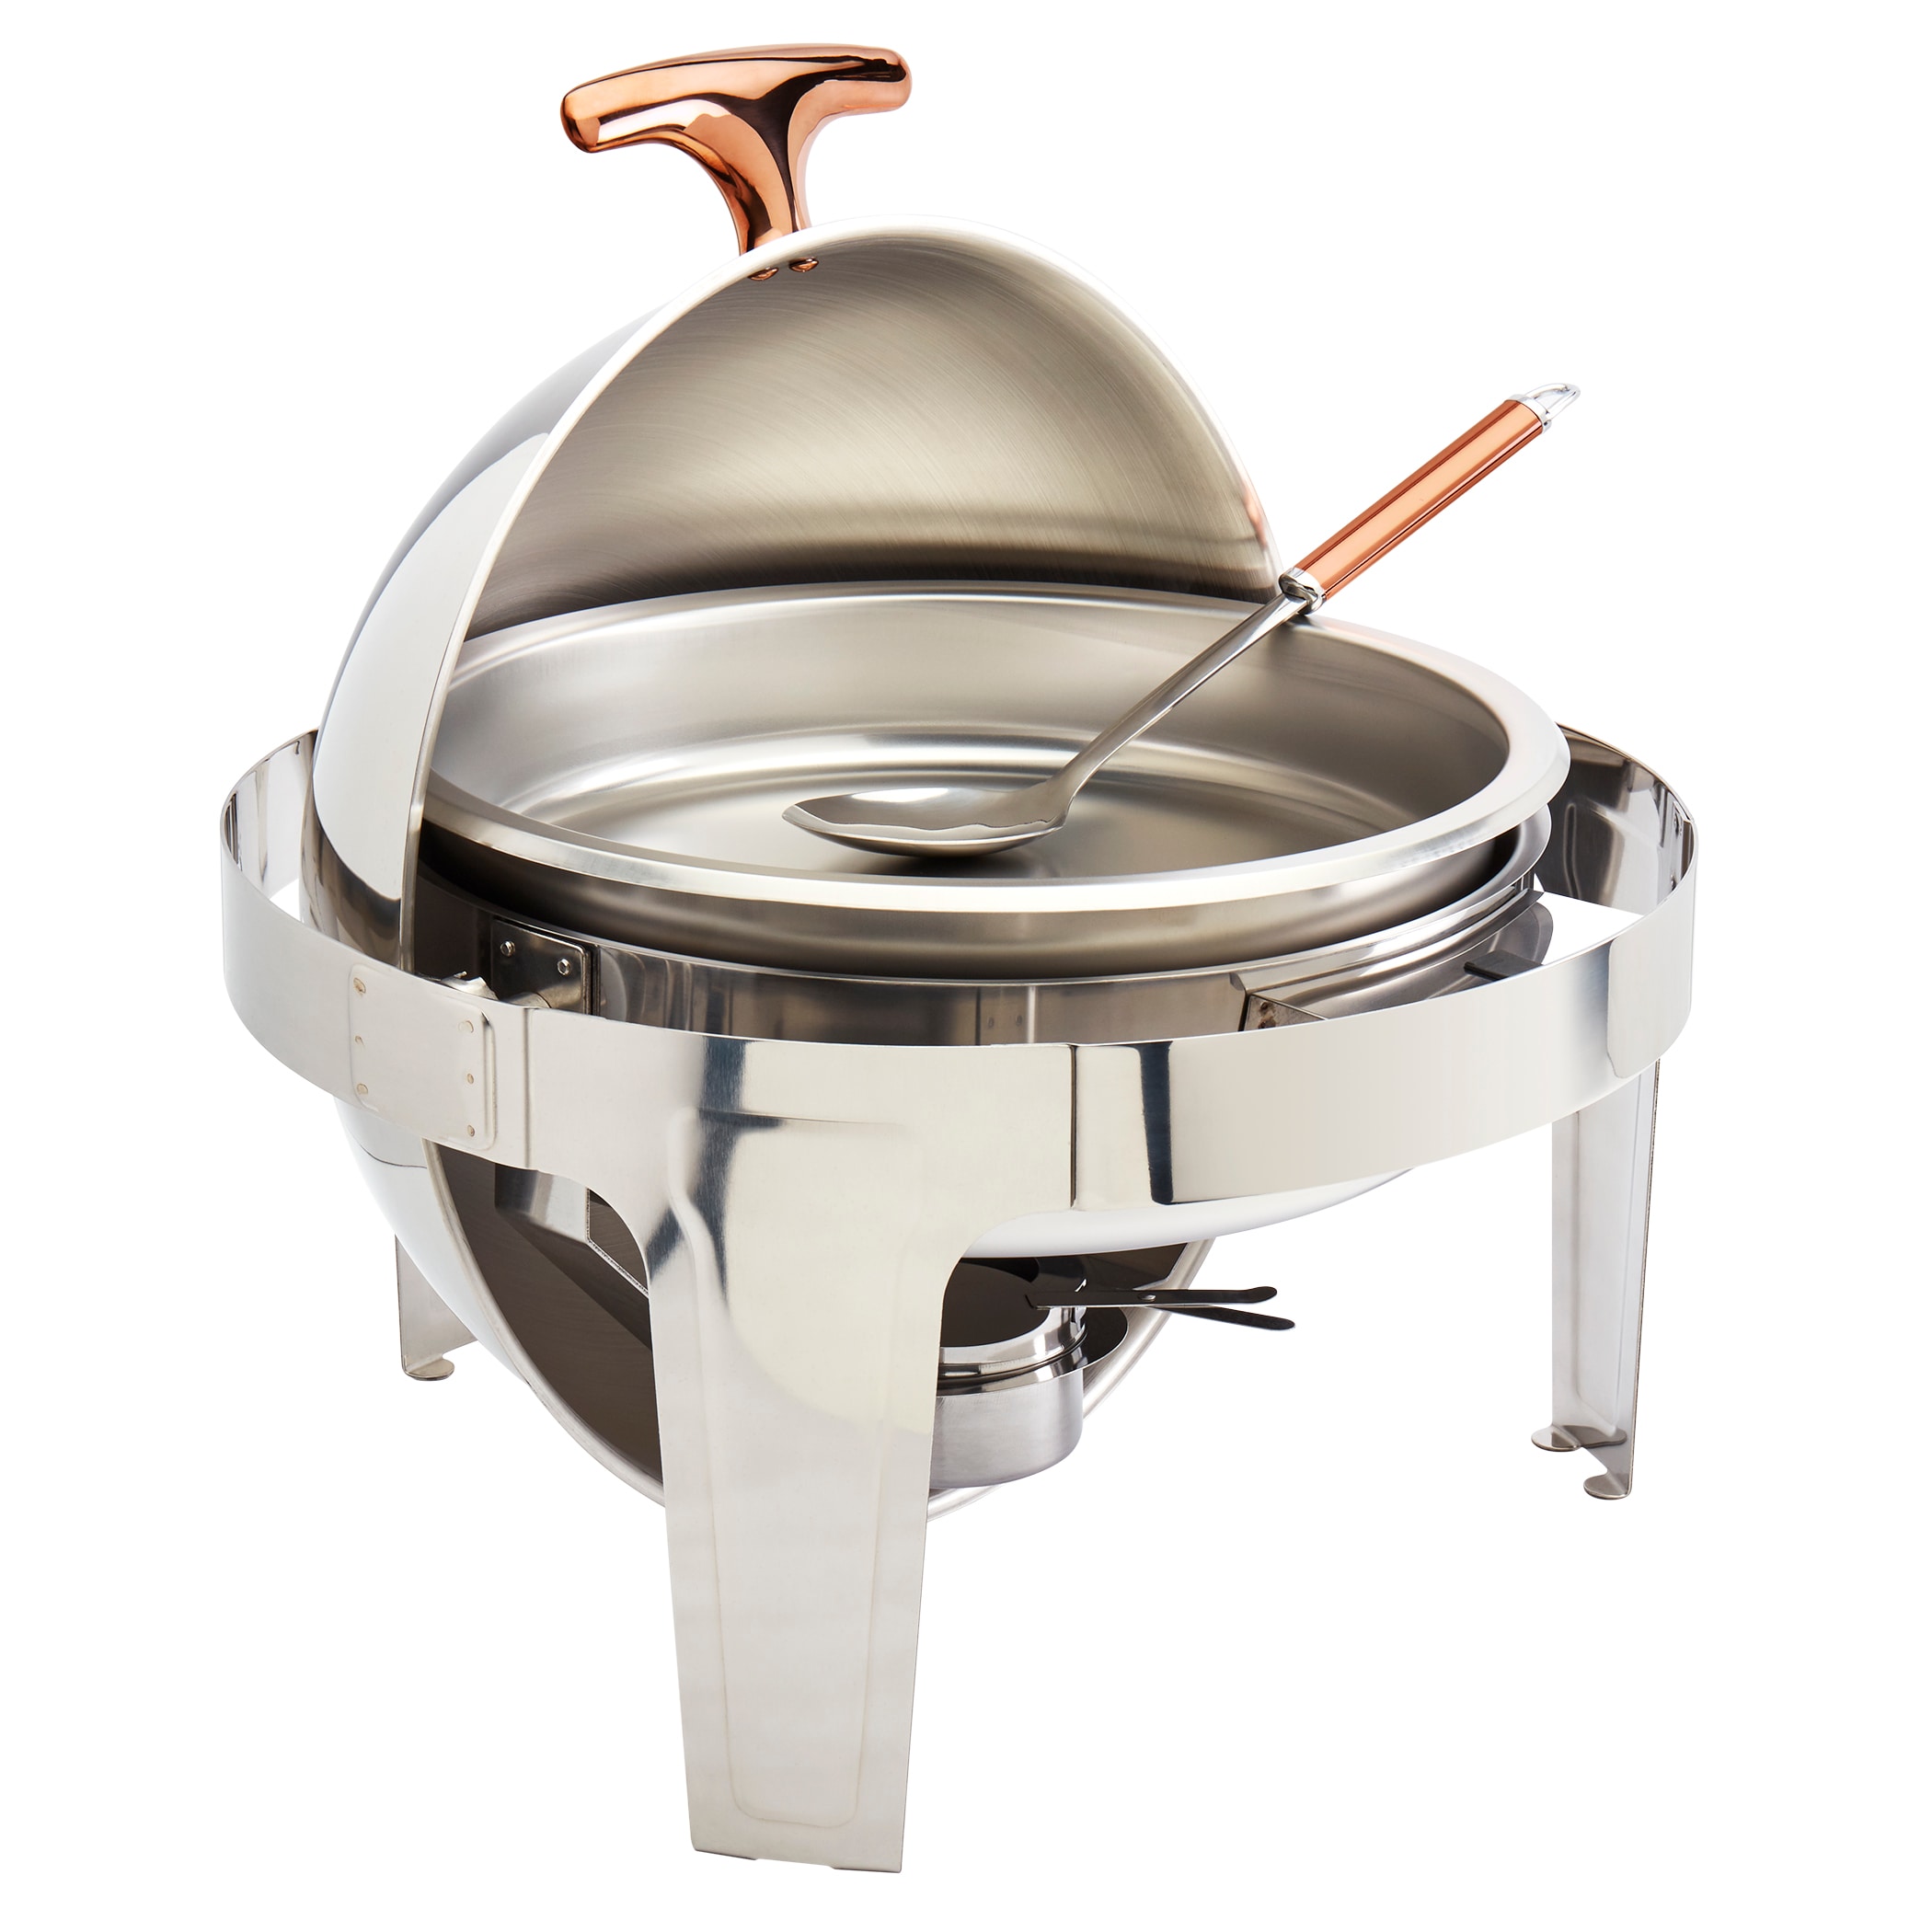 Celebrations by Denmark Stainless Steel Round Chafing Dish - 6.3 qt